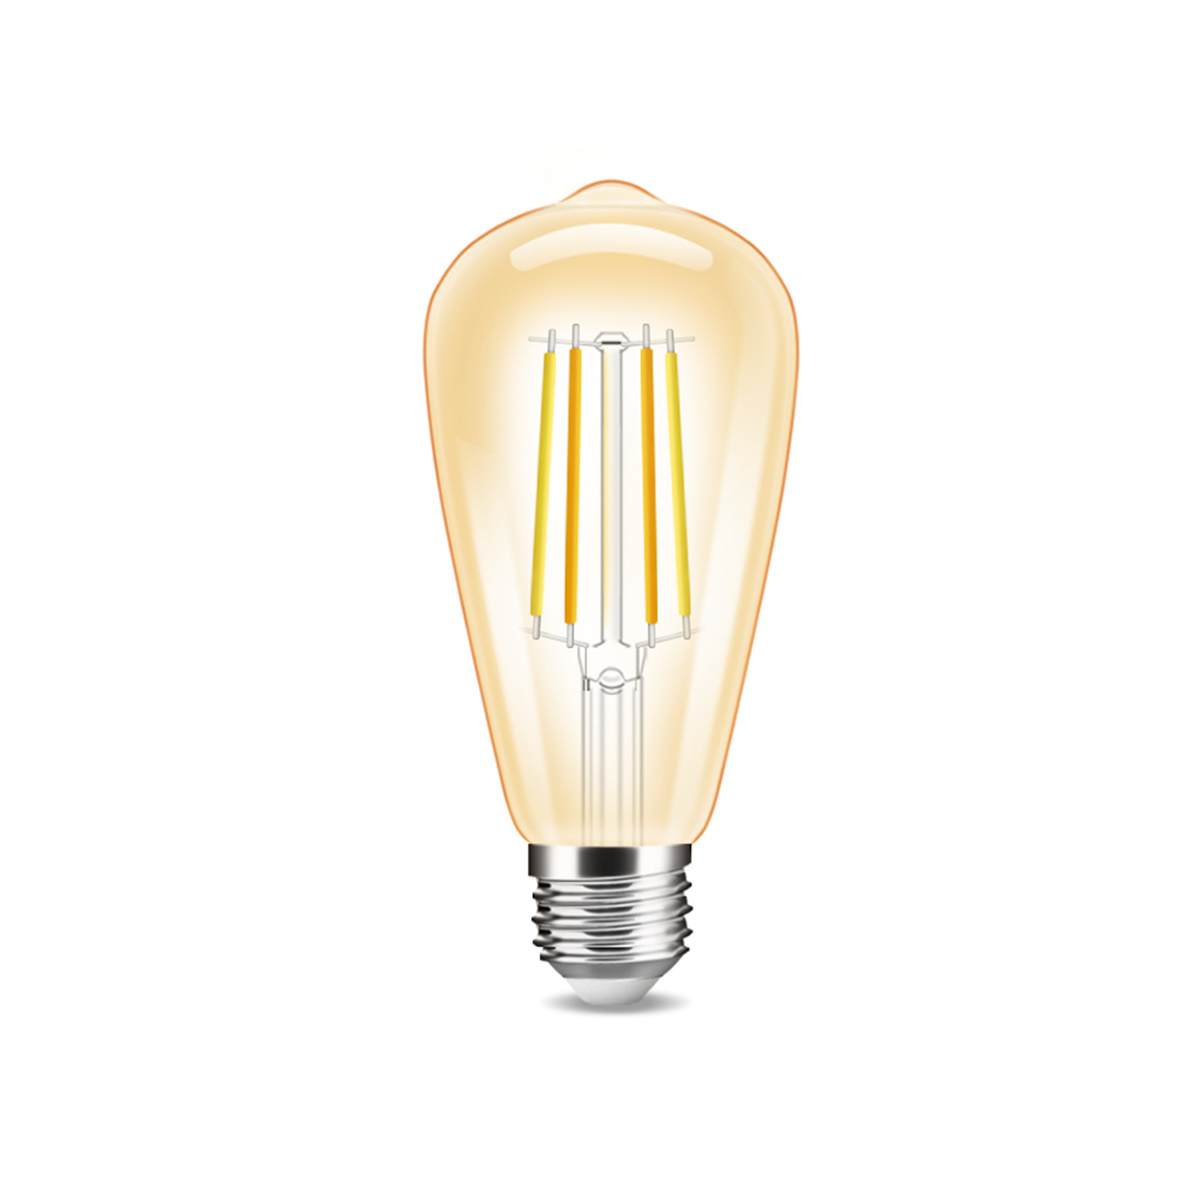 One of Hottest for Intelligent Lamp - Dimmable Smart Filament Bulb E27 Vintage With tunable white 2200-6500K CBS – C-Lux